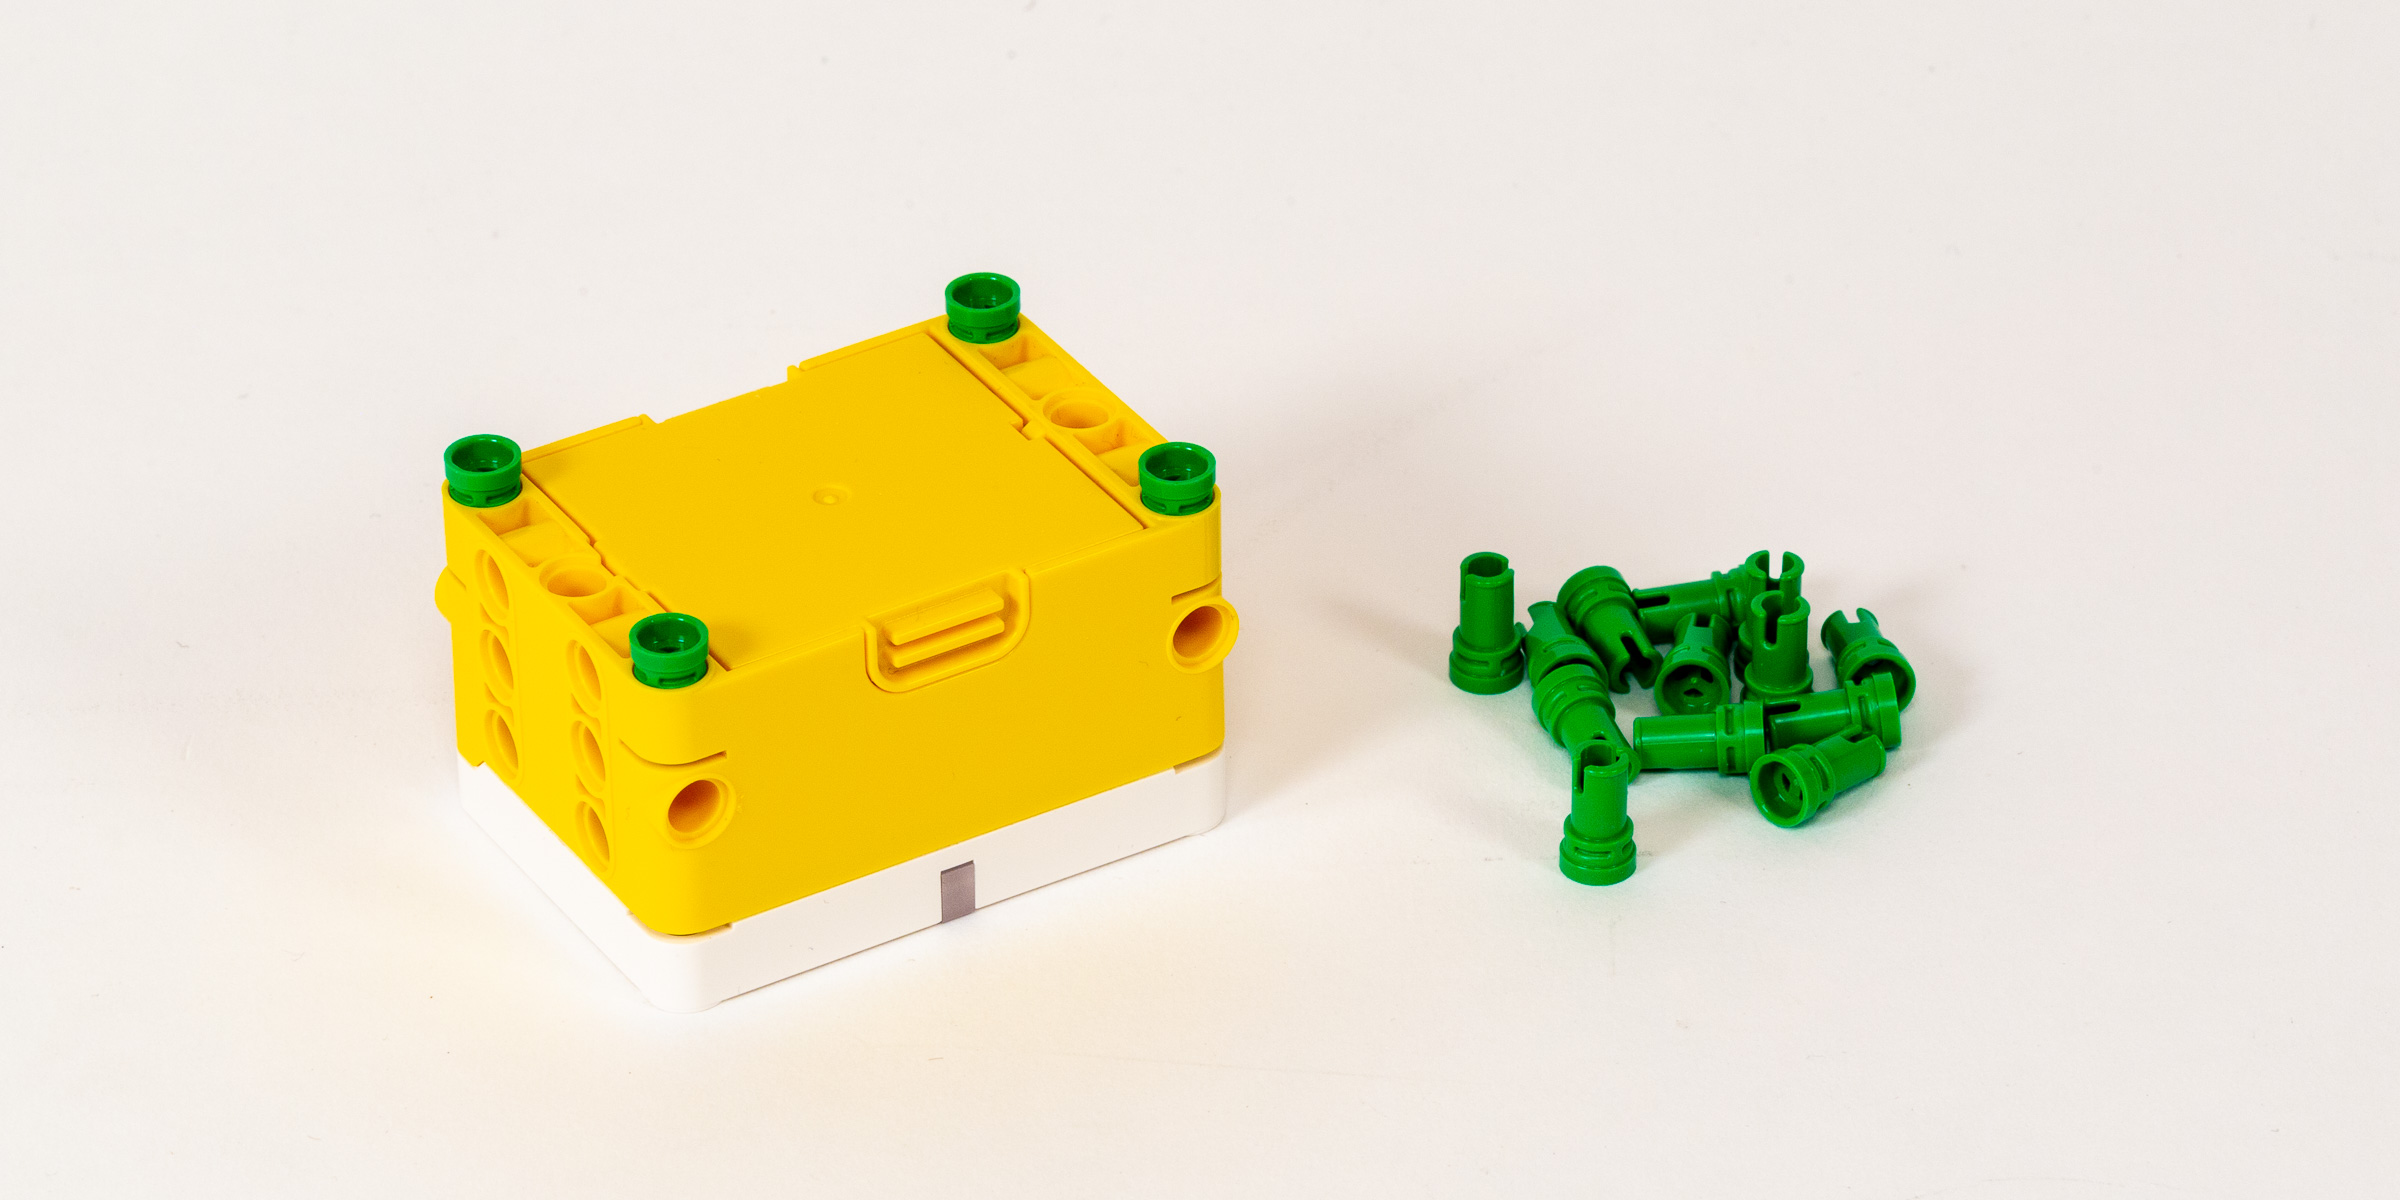 Making a Lego Spirograph, and then modeling it., by Andrew Nolte